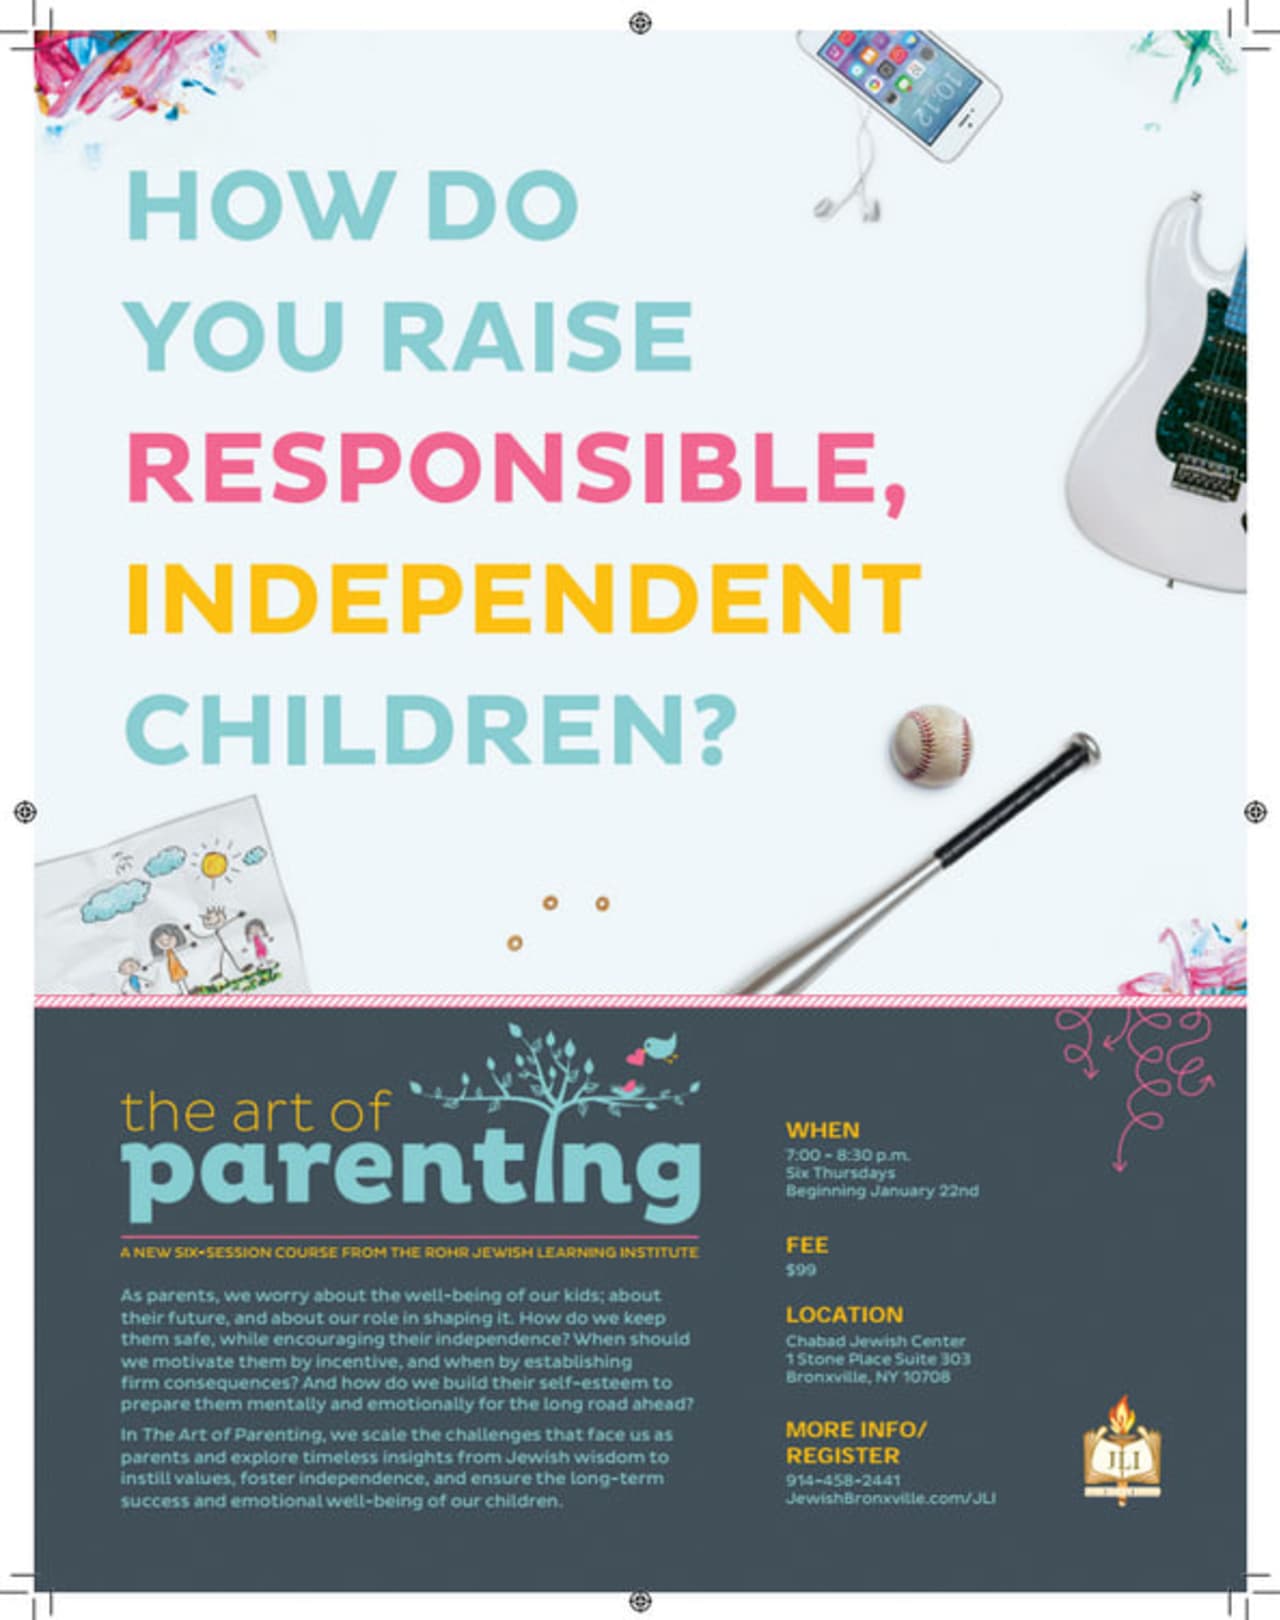 The Rohr Jewish Learning Institute is offering an institute on parenting.